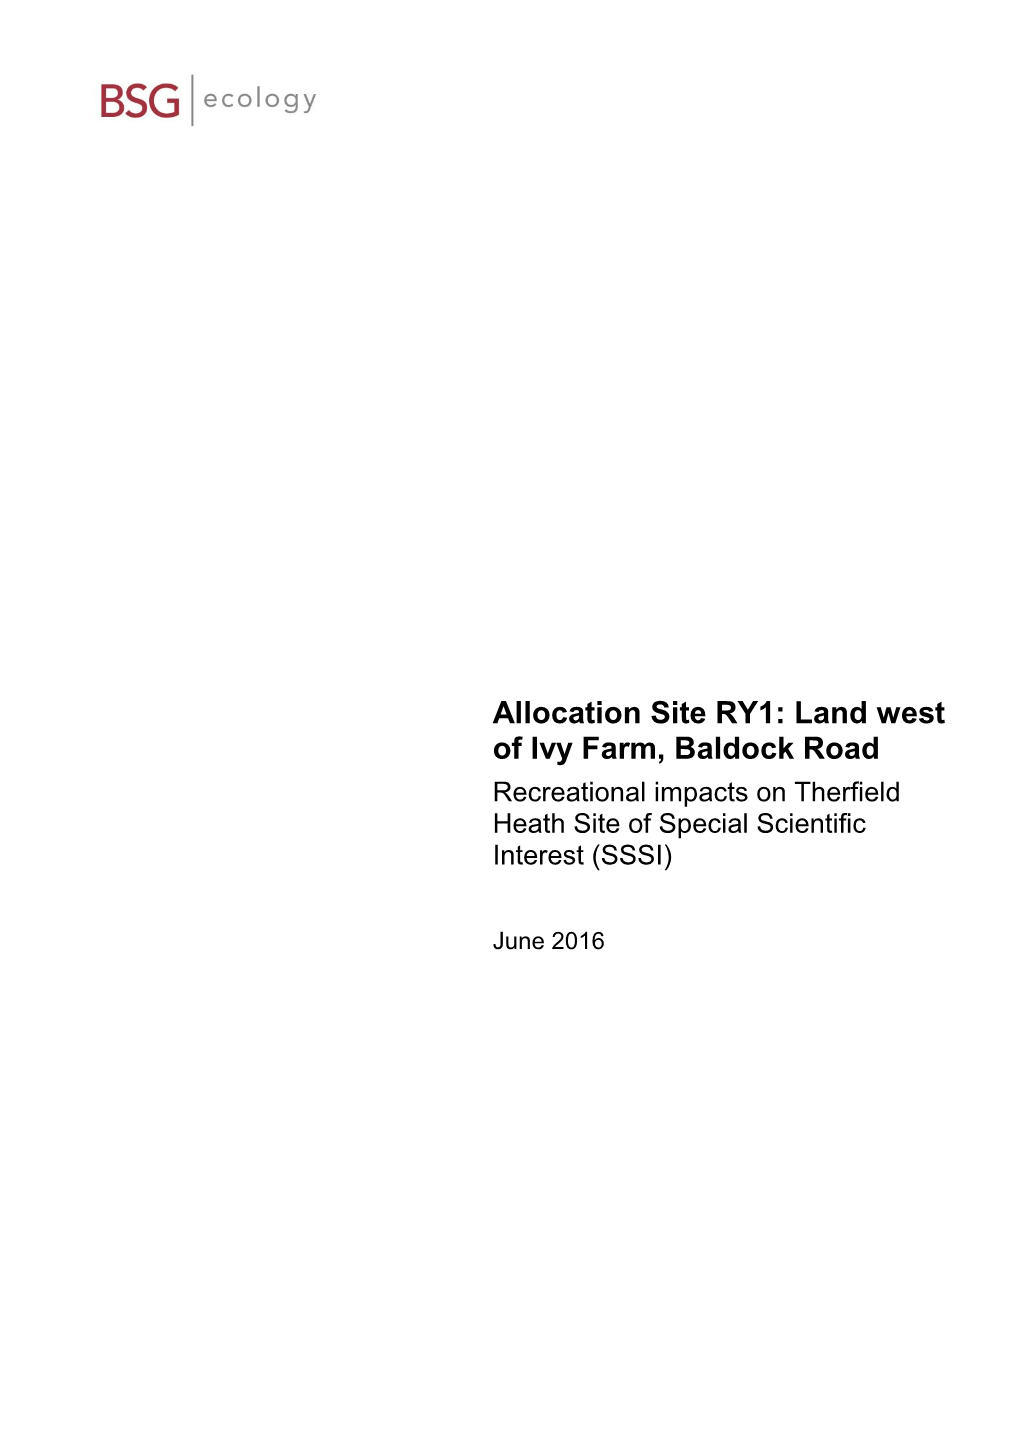 Allocation Site RY1: Land West of Ivy Farm, Baldock Road Recreational Impacts on Therfield Heath Site of Special Scientific Interest (SSSI)